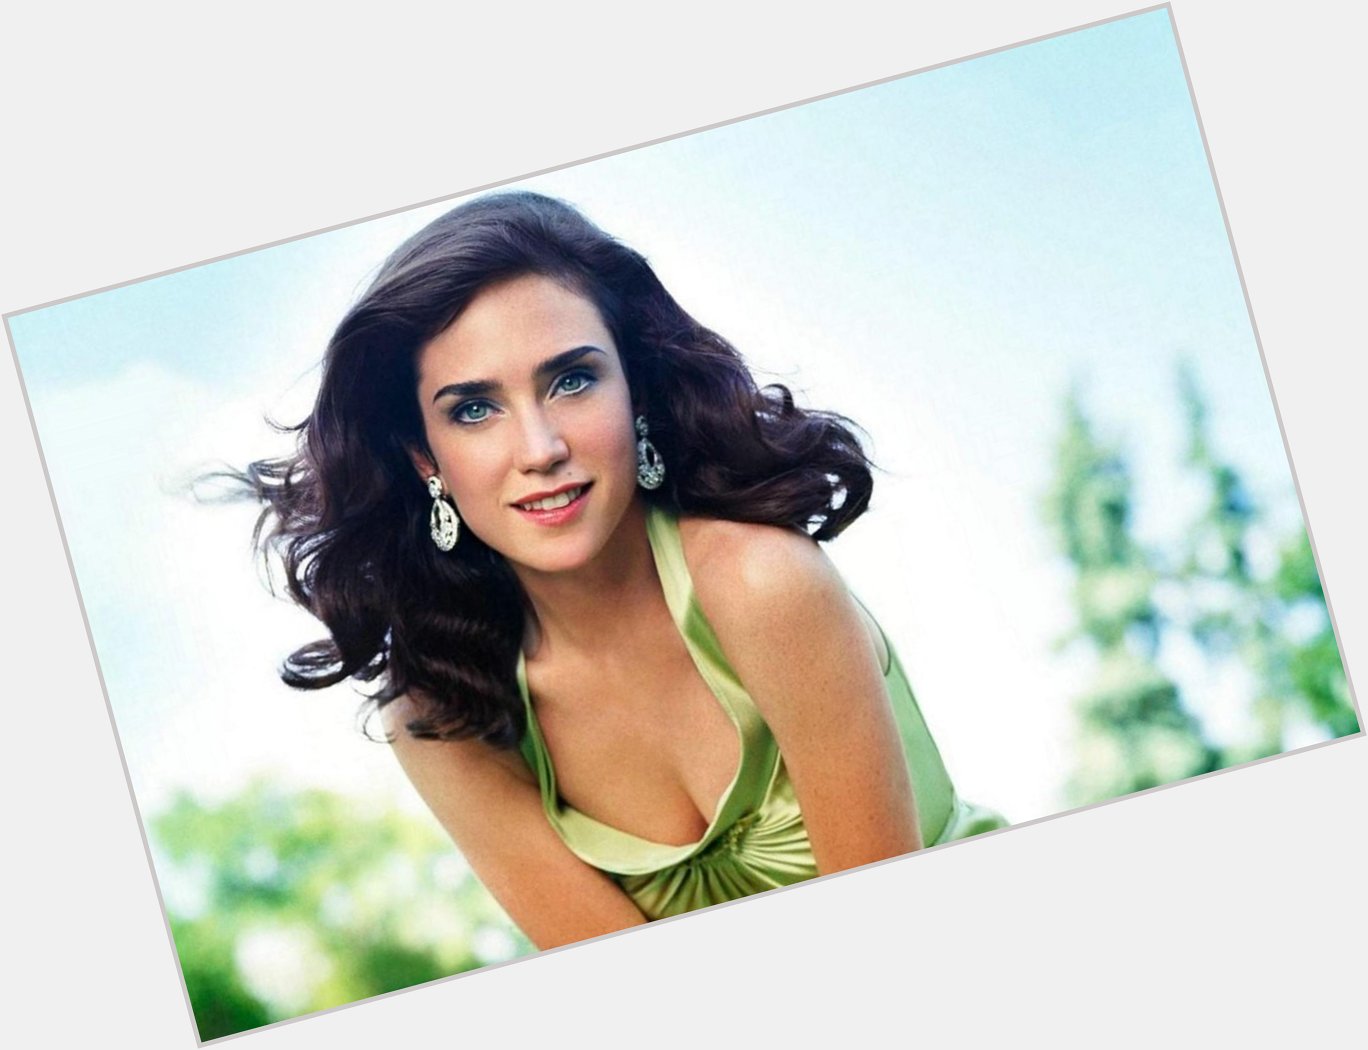 Happy birthday to one of our favorite actresses in the biz, Jennifer Connelly! 